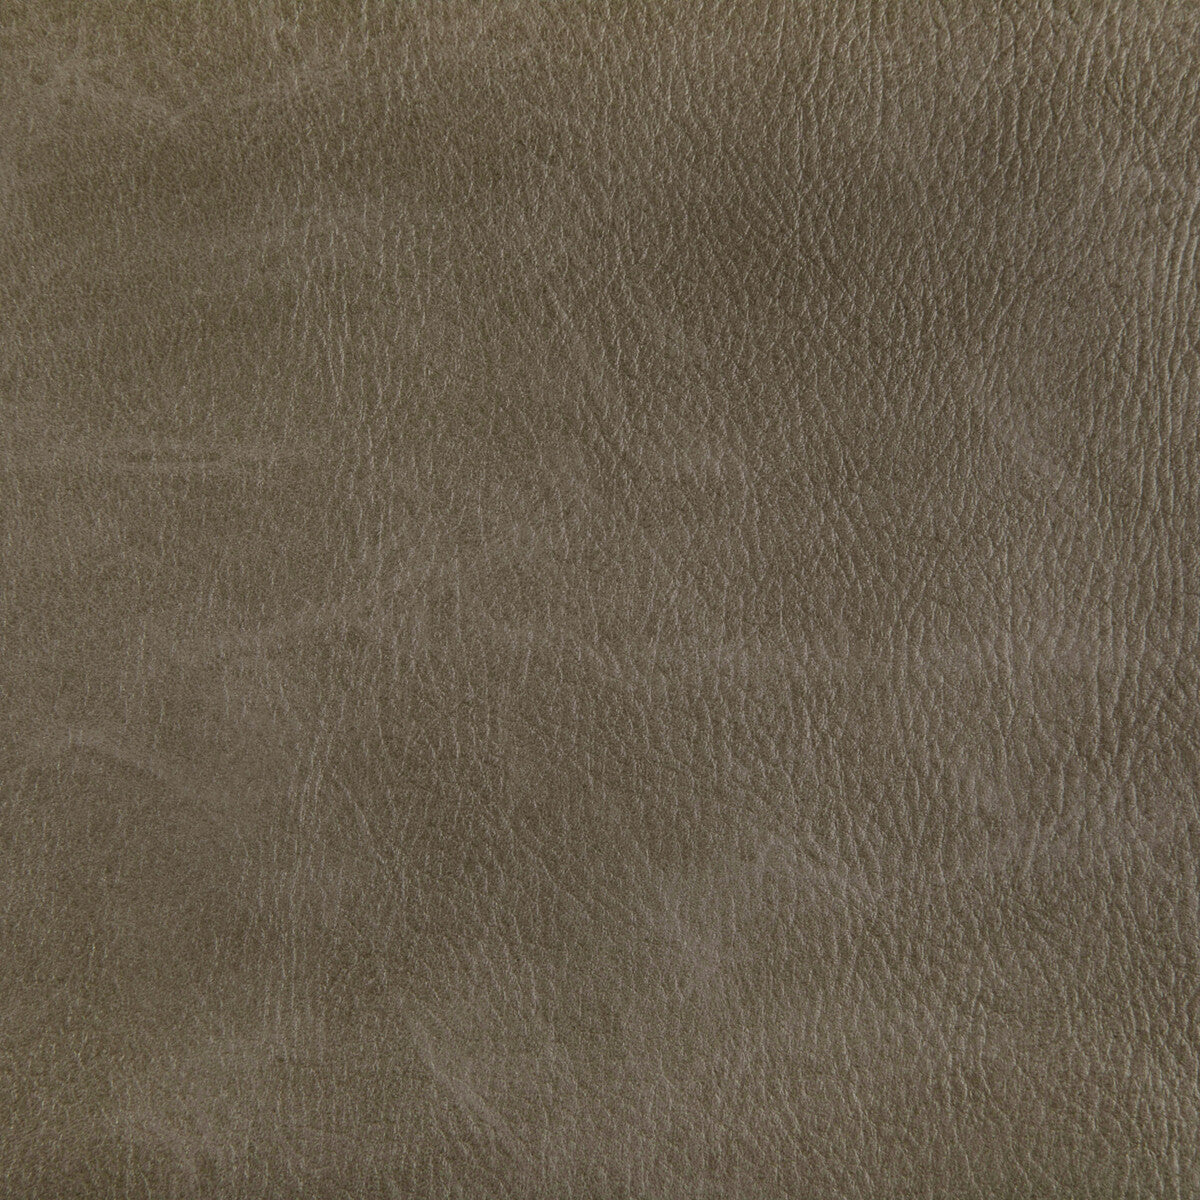 Toni fabric in field color - pattern TONI.6.0 - by Kravet Contract